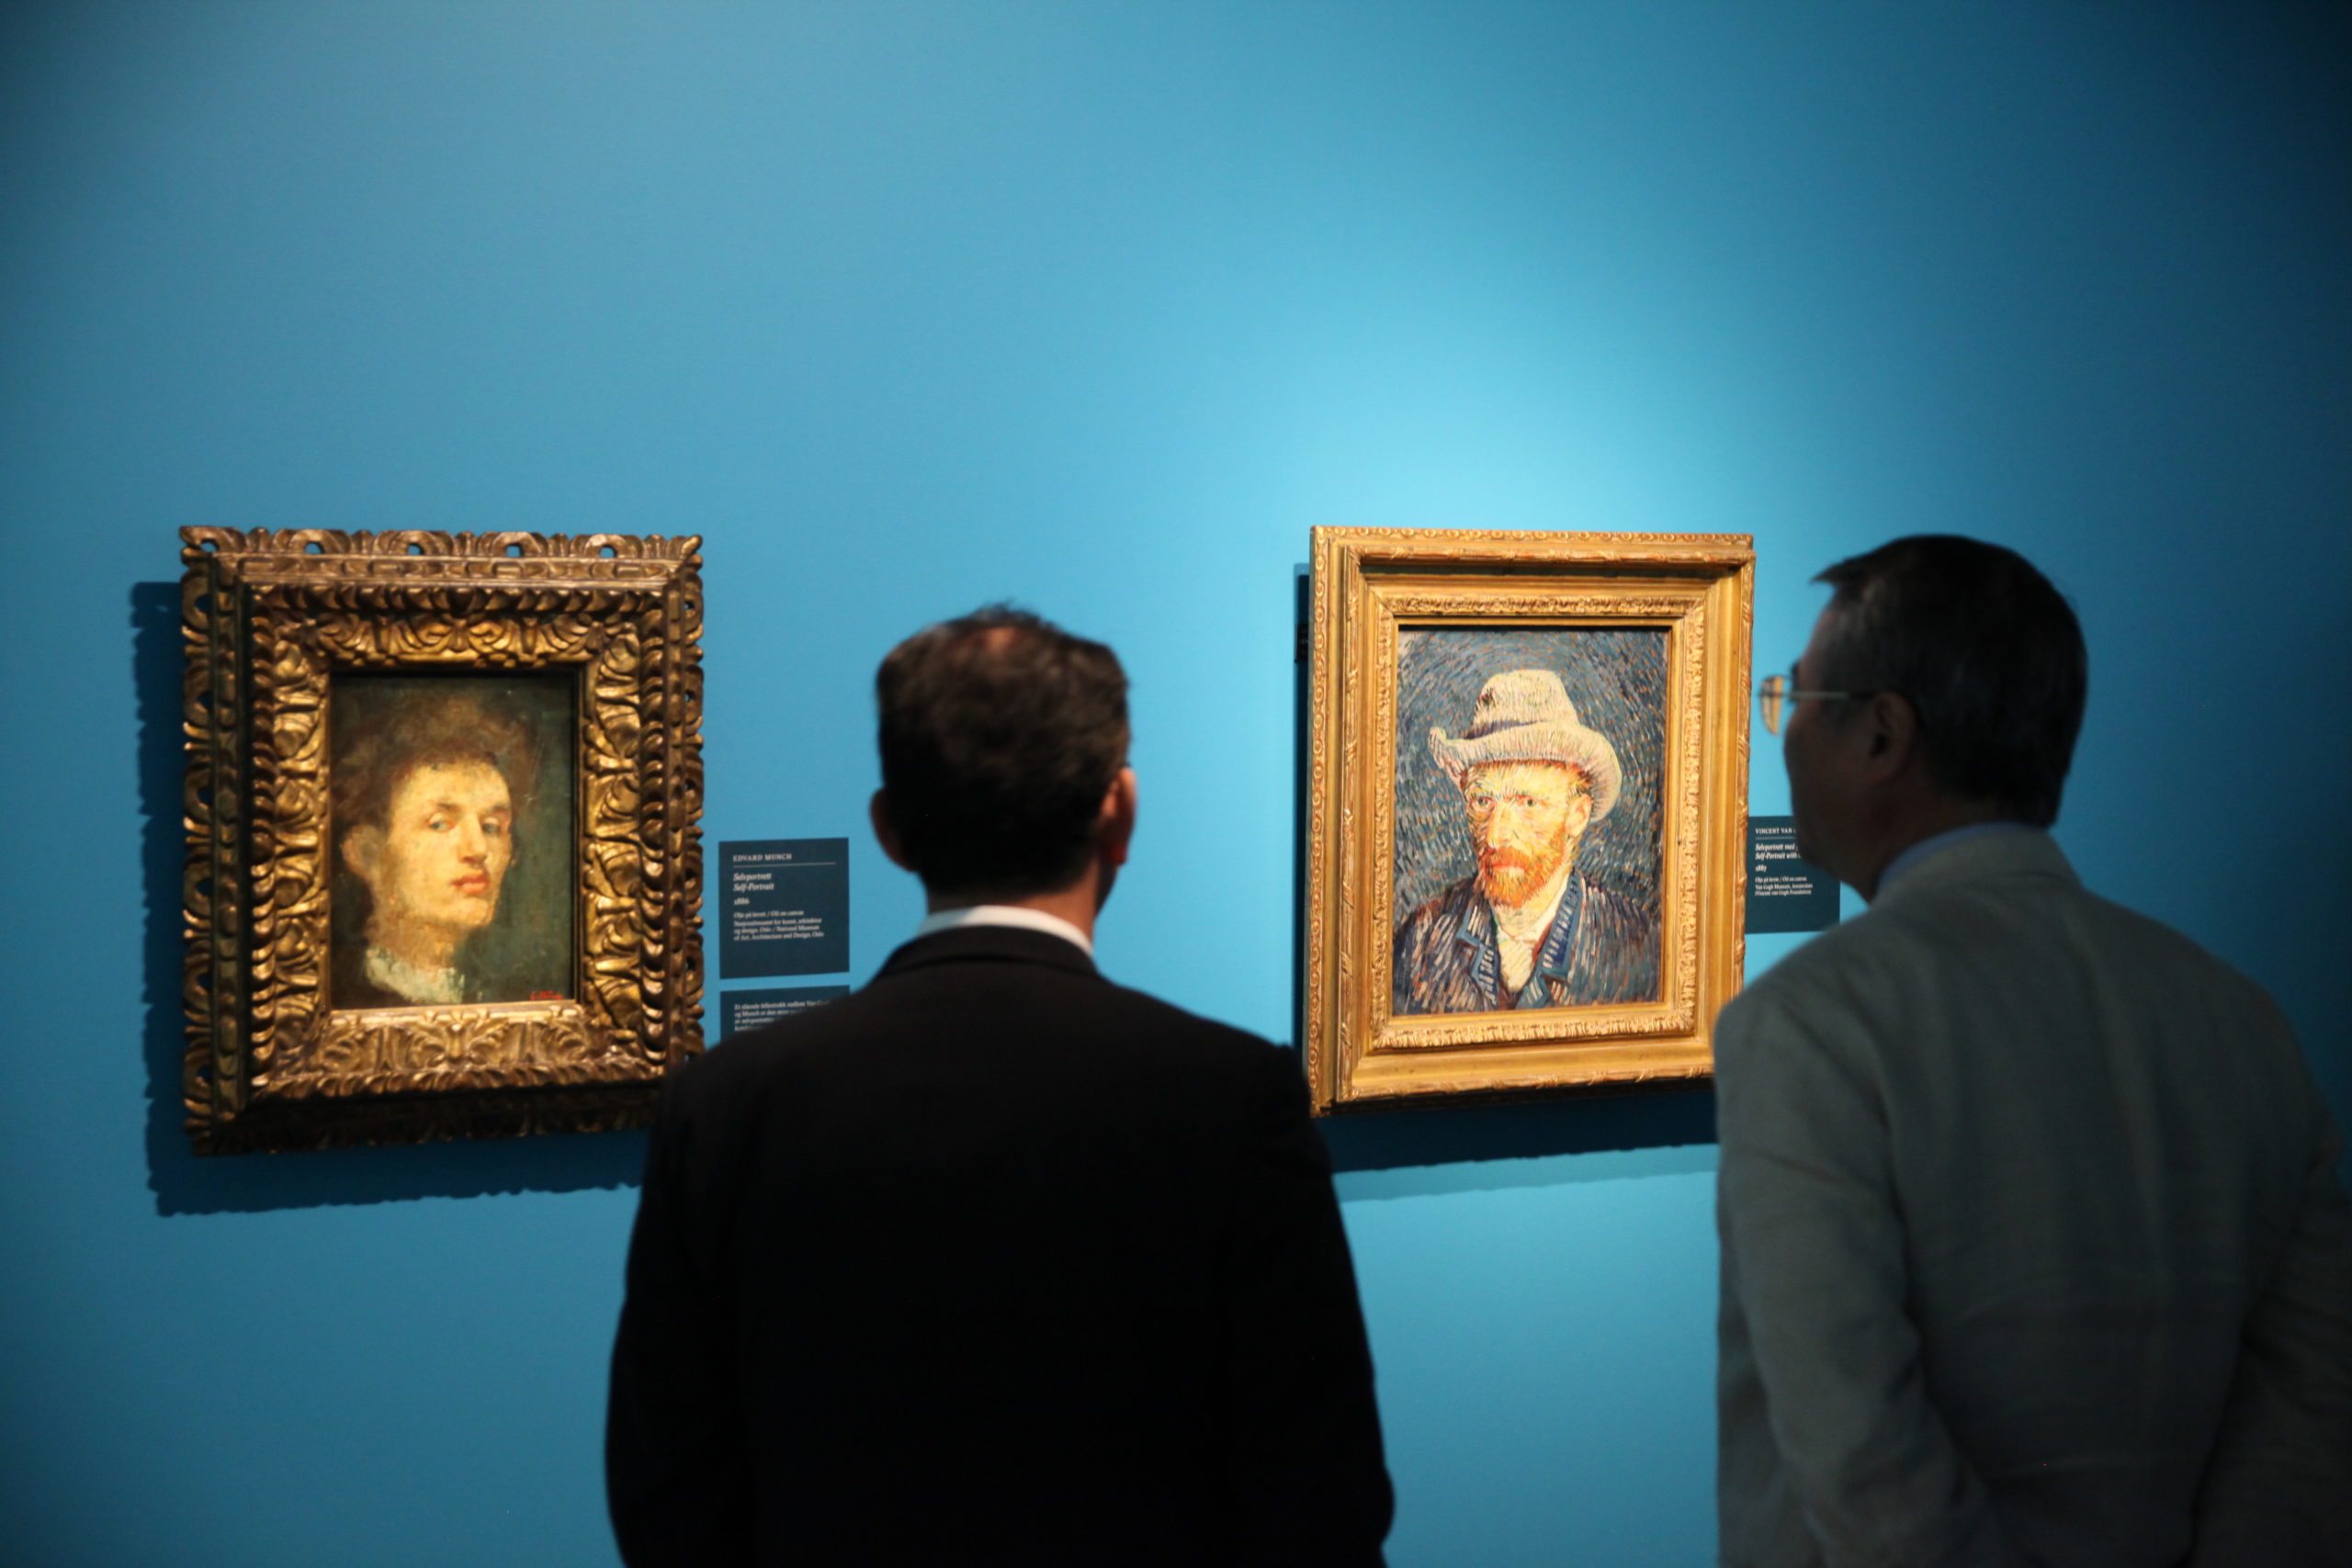 Visitors looking at Munch and van Gogh self portraits in Munchmuseet, 2015